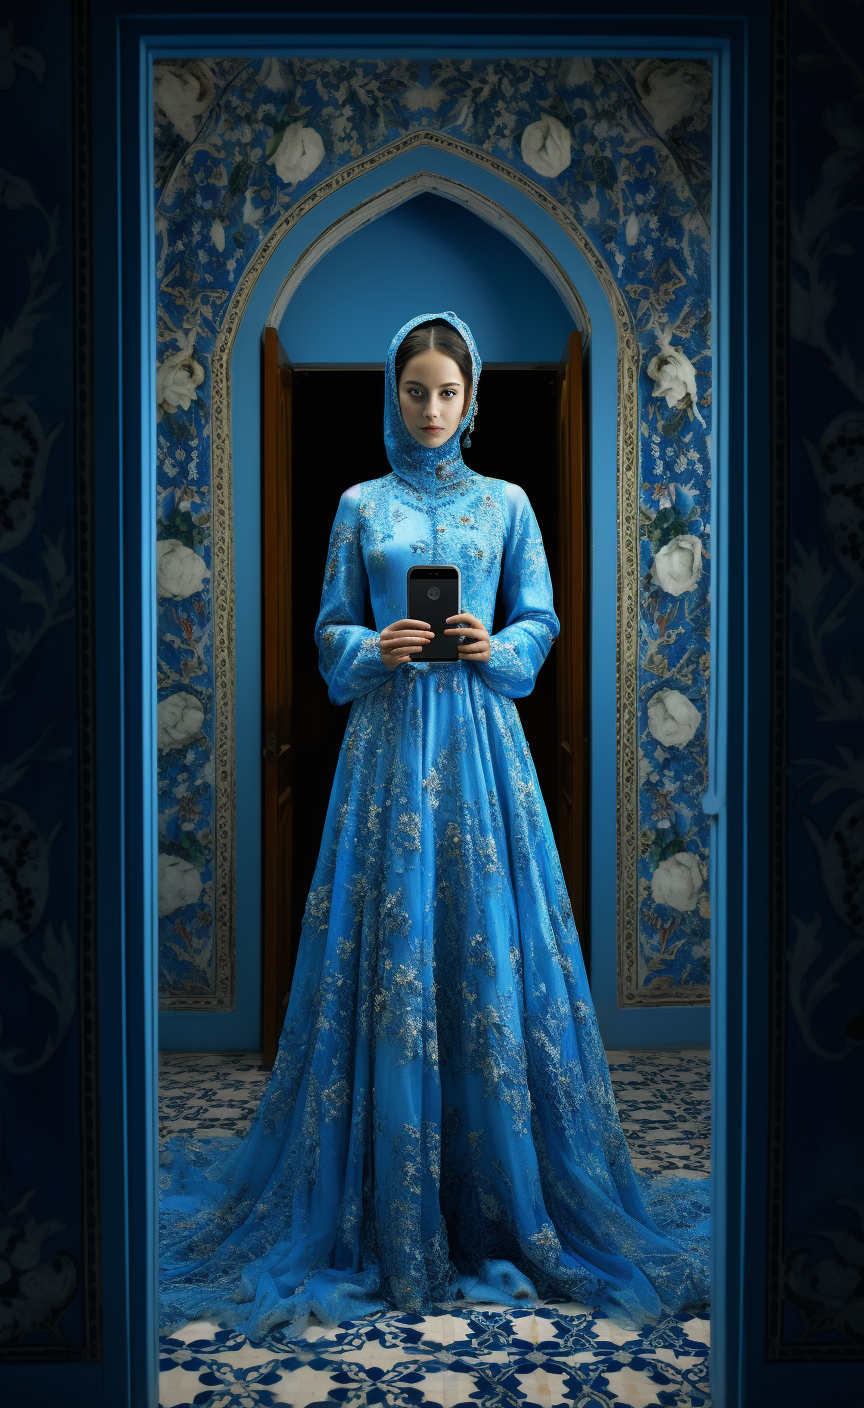 mimigreen_an_app_with_an_ornamented_dress_in_a_blue_room_in_the_9bf14874-b240-4bc6-8066-2987bbf6dc04.png